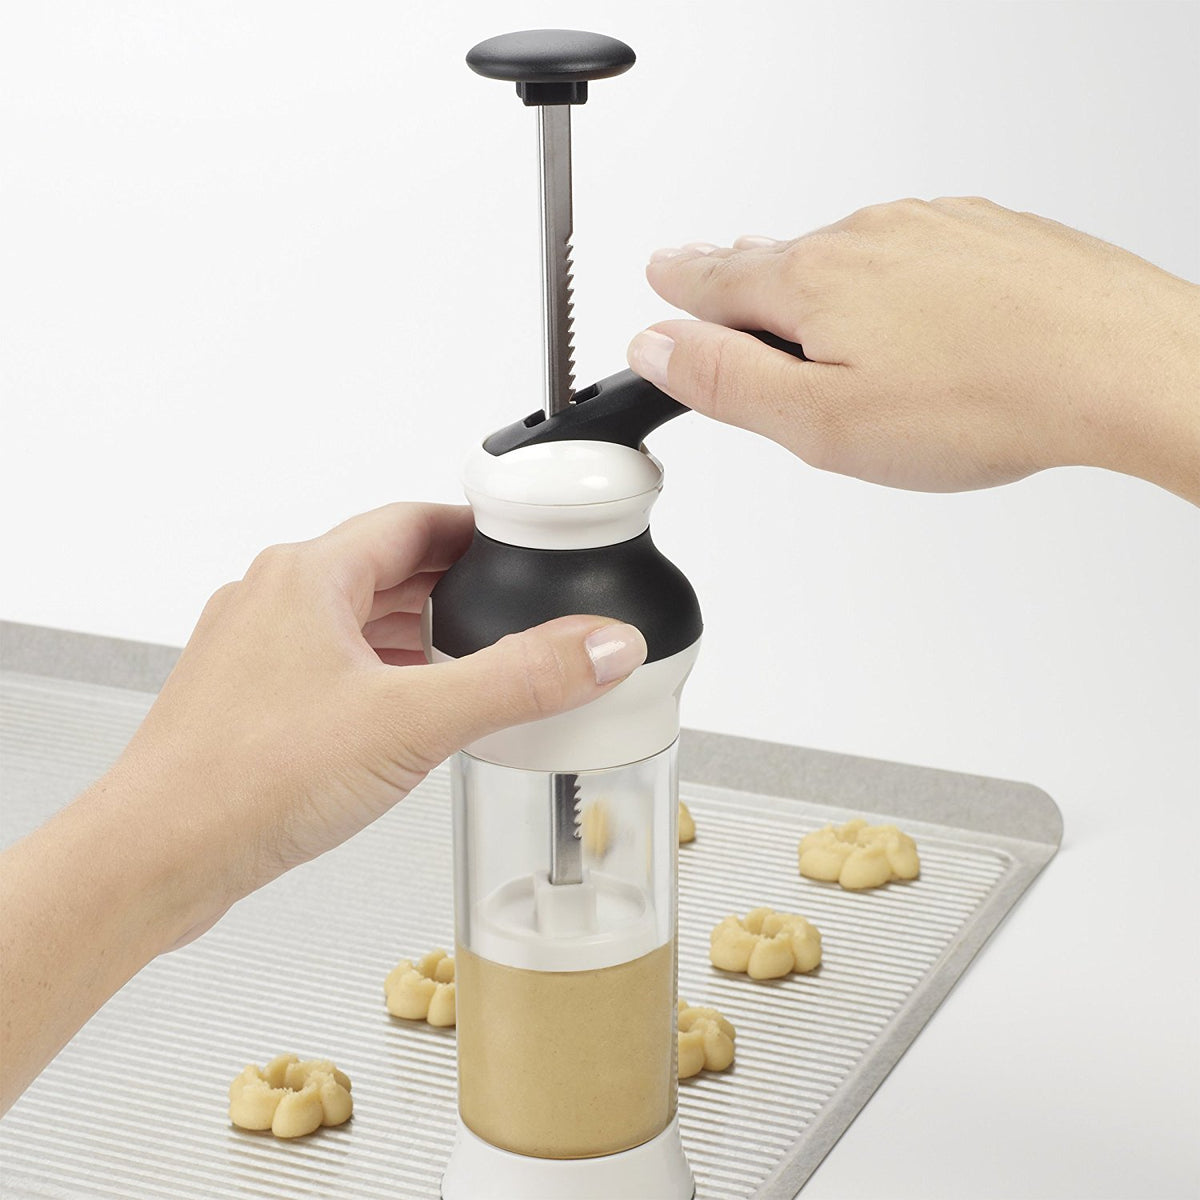 Oxo 1257580 Good Grips Cookie Press with Stainless Steel Disks